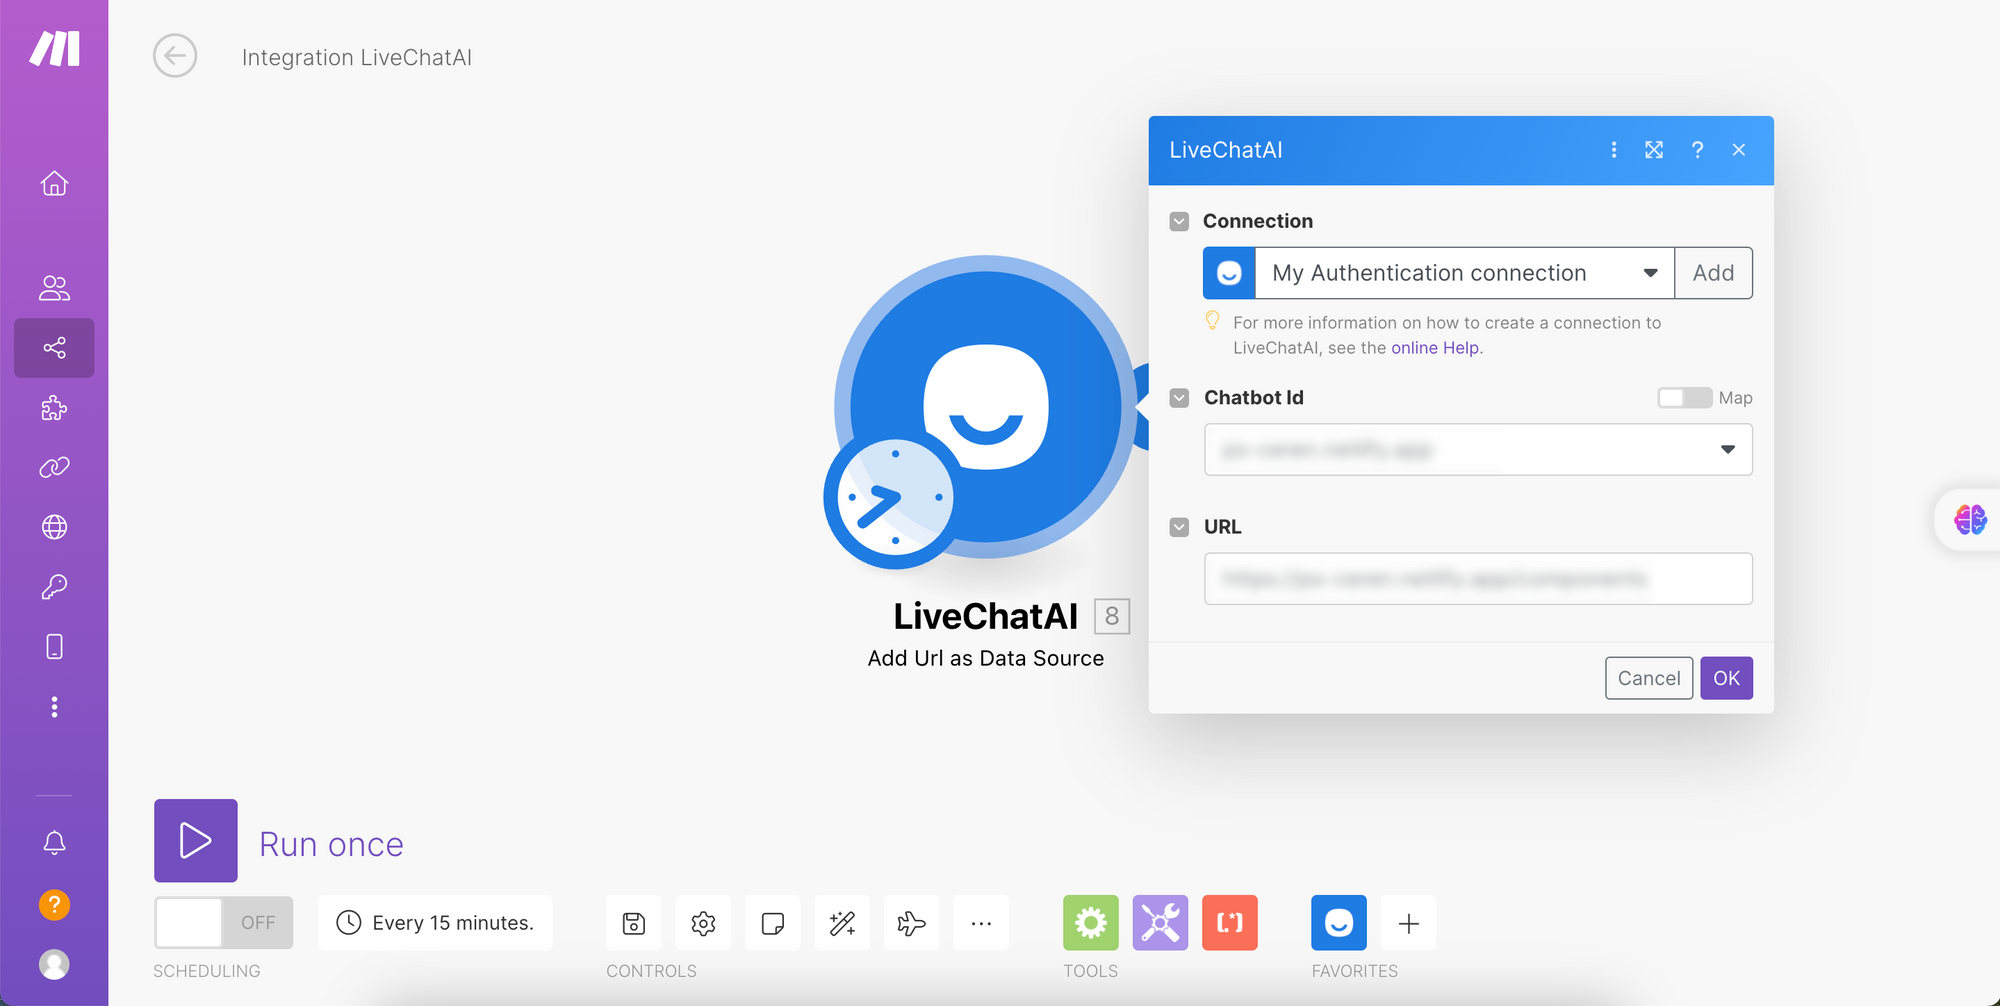 Editing Chatbot ID and URL section in LiveChatAI module in Make.com